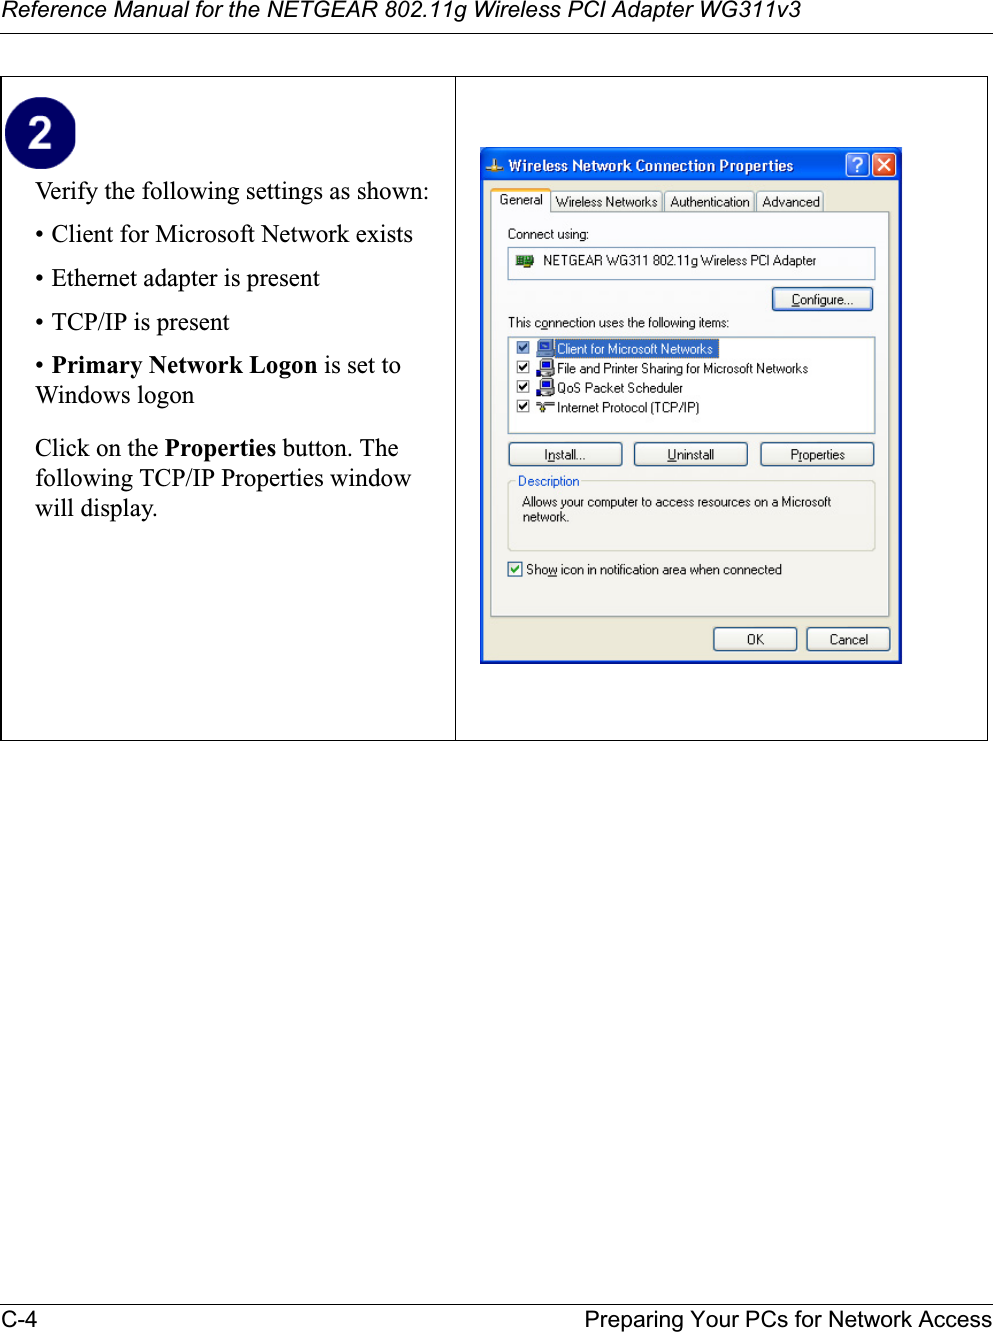 Reference Manual for the NETGEAR 802.11g Wireless PCI Adapter WG311v3C-4 Preparing Your PCs for Network AccessVerify the following settings as shown: • Client for Microsoft Network exists• Ethernet adapter is present• TCP/IP is present•Primary Network Logon is set to Windows logonClick on the Properties button. The following TCP/IP Properties window will display.